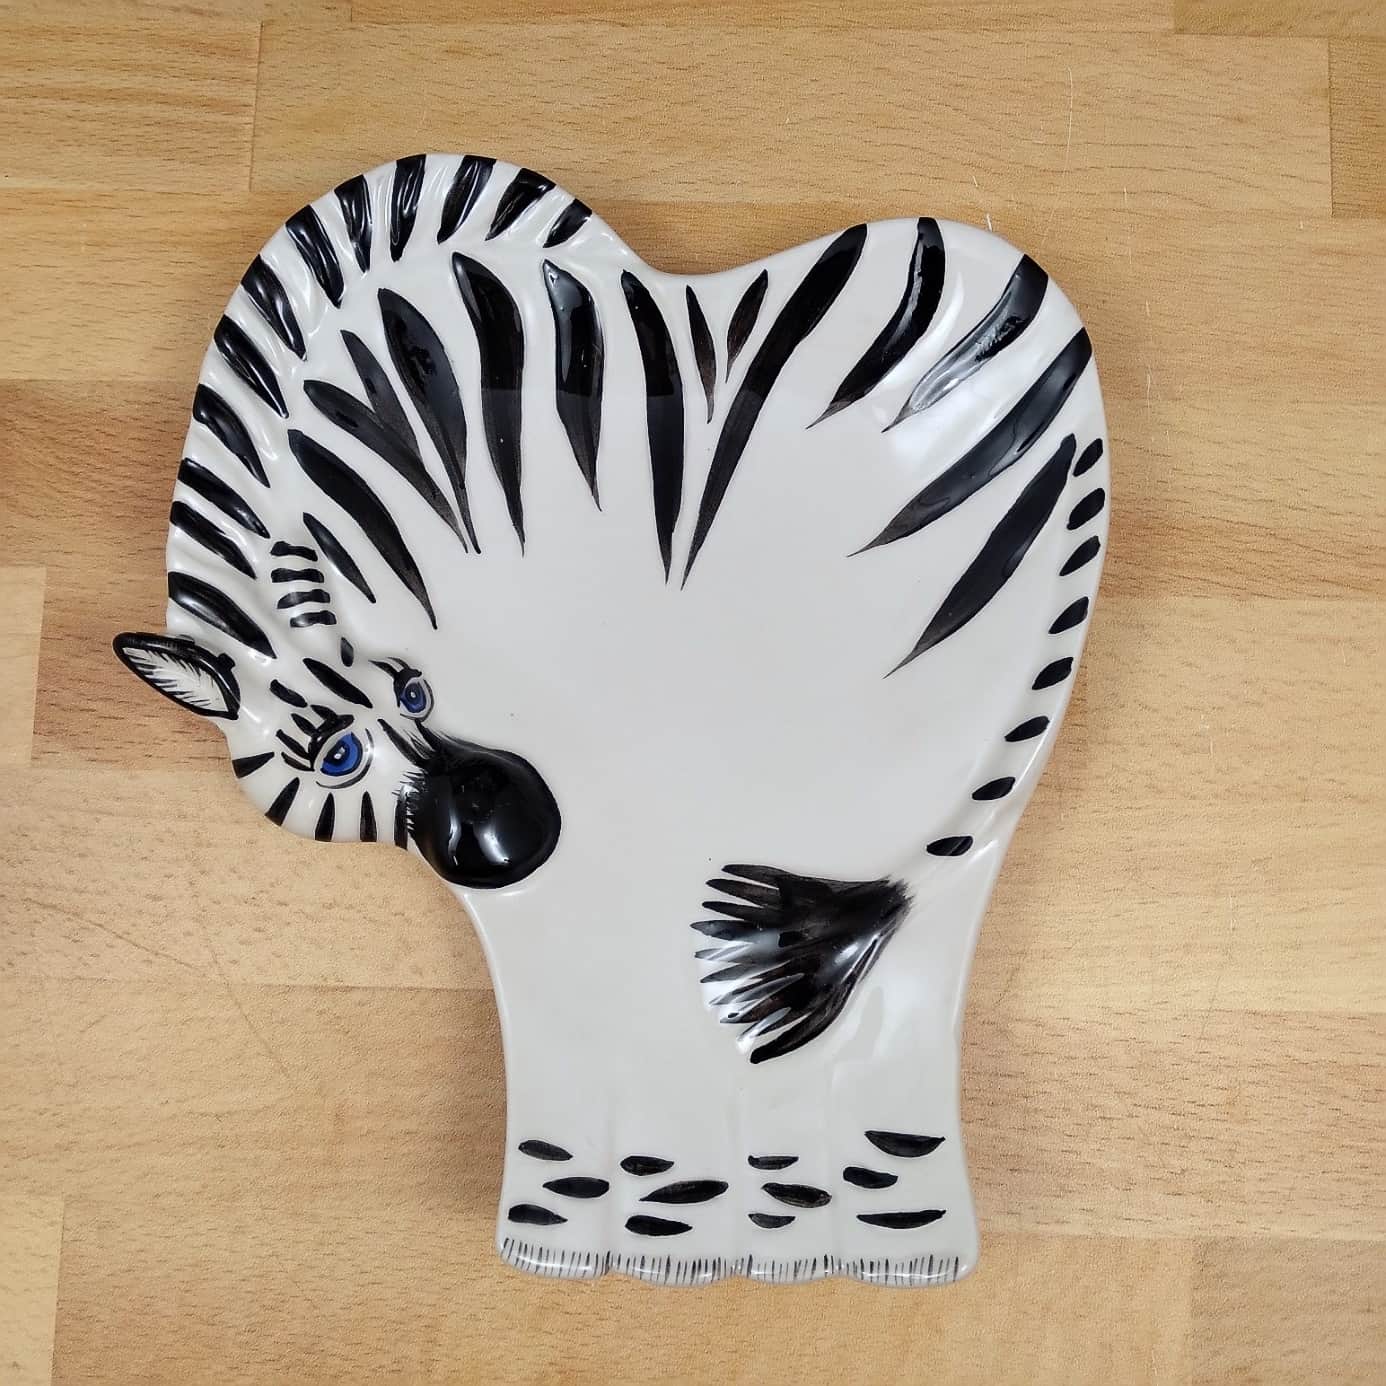 This Zebra Spoon Rest Ceramic by Blue and Sky Lynda Corneille is made with love by Premier Homegoods! Shop more unique gift ideas today with Spots Initiatives, the best way to support creators.